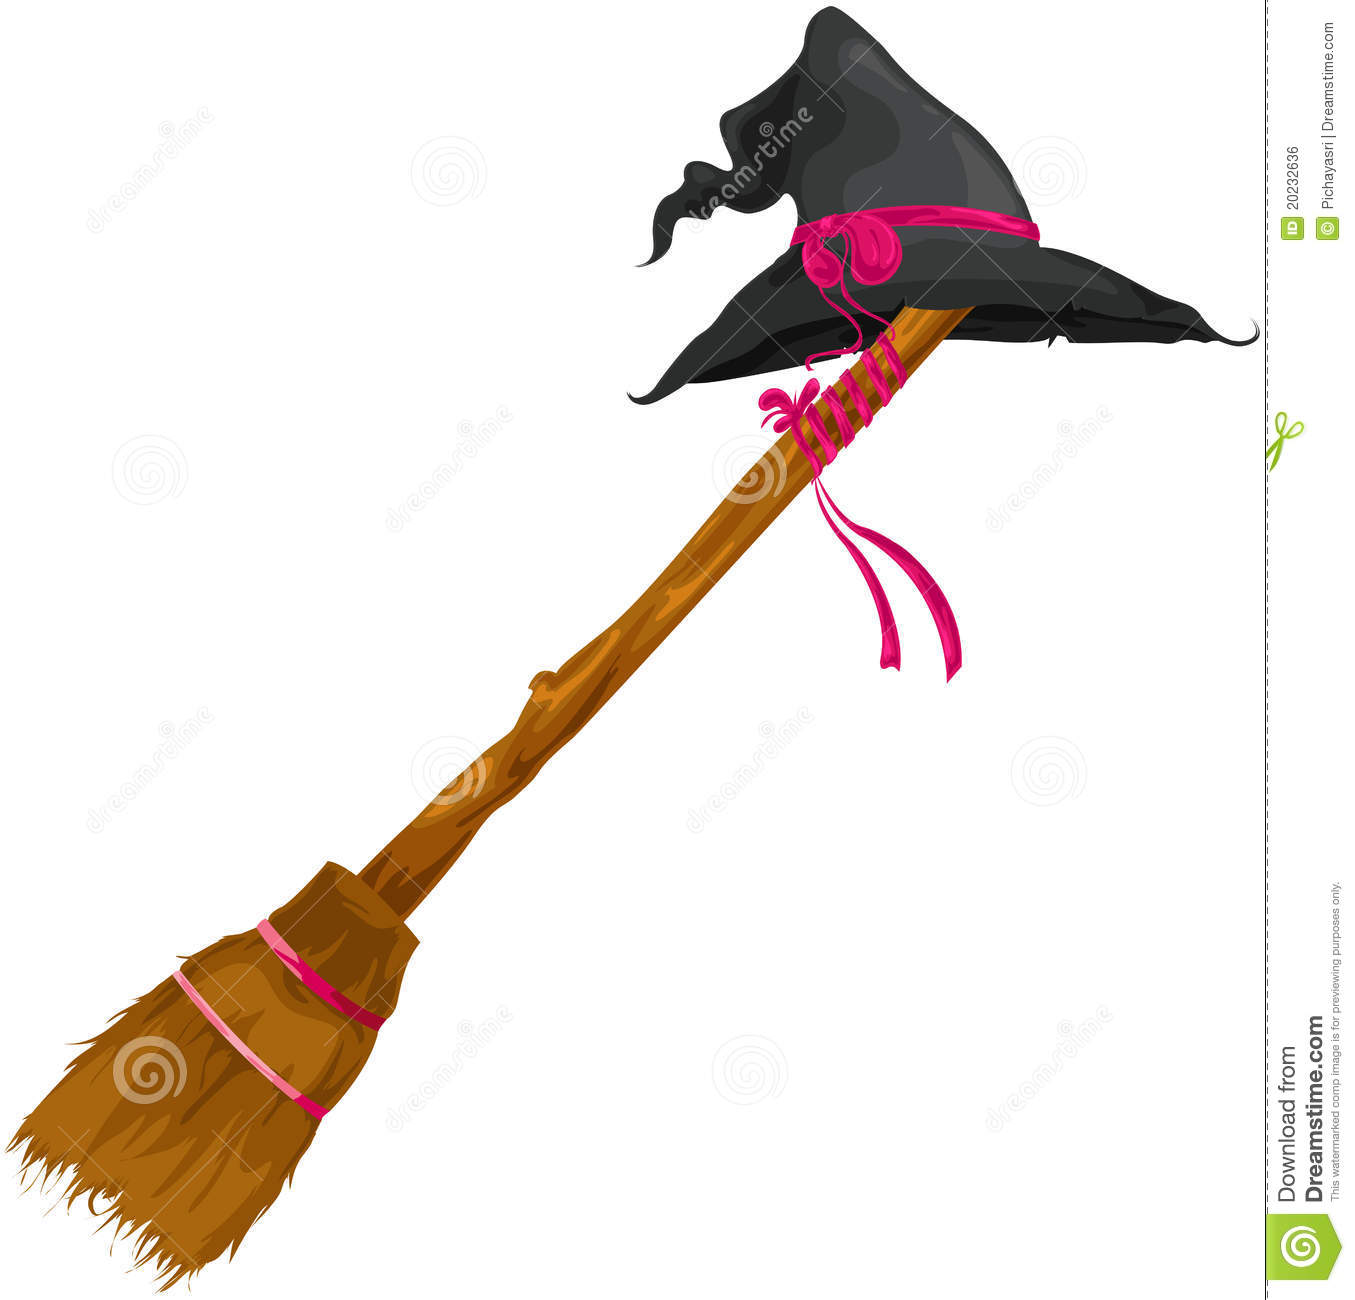 Witch Hat With Broom Royalty Free Stock Image   Image  20232636